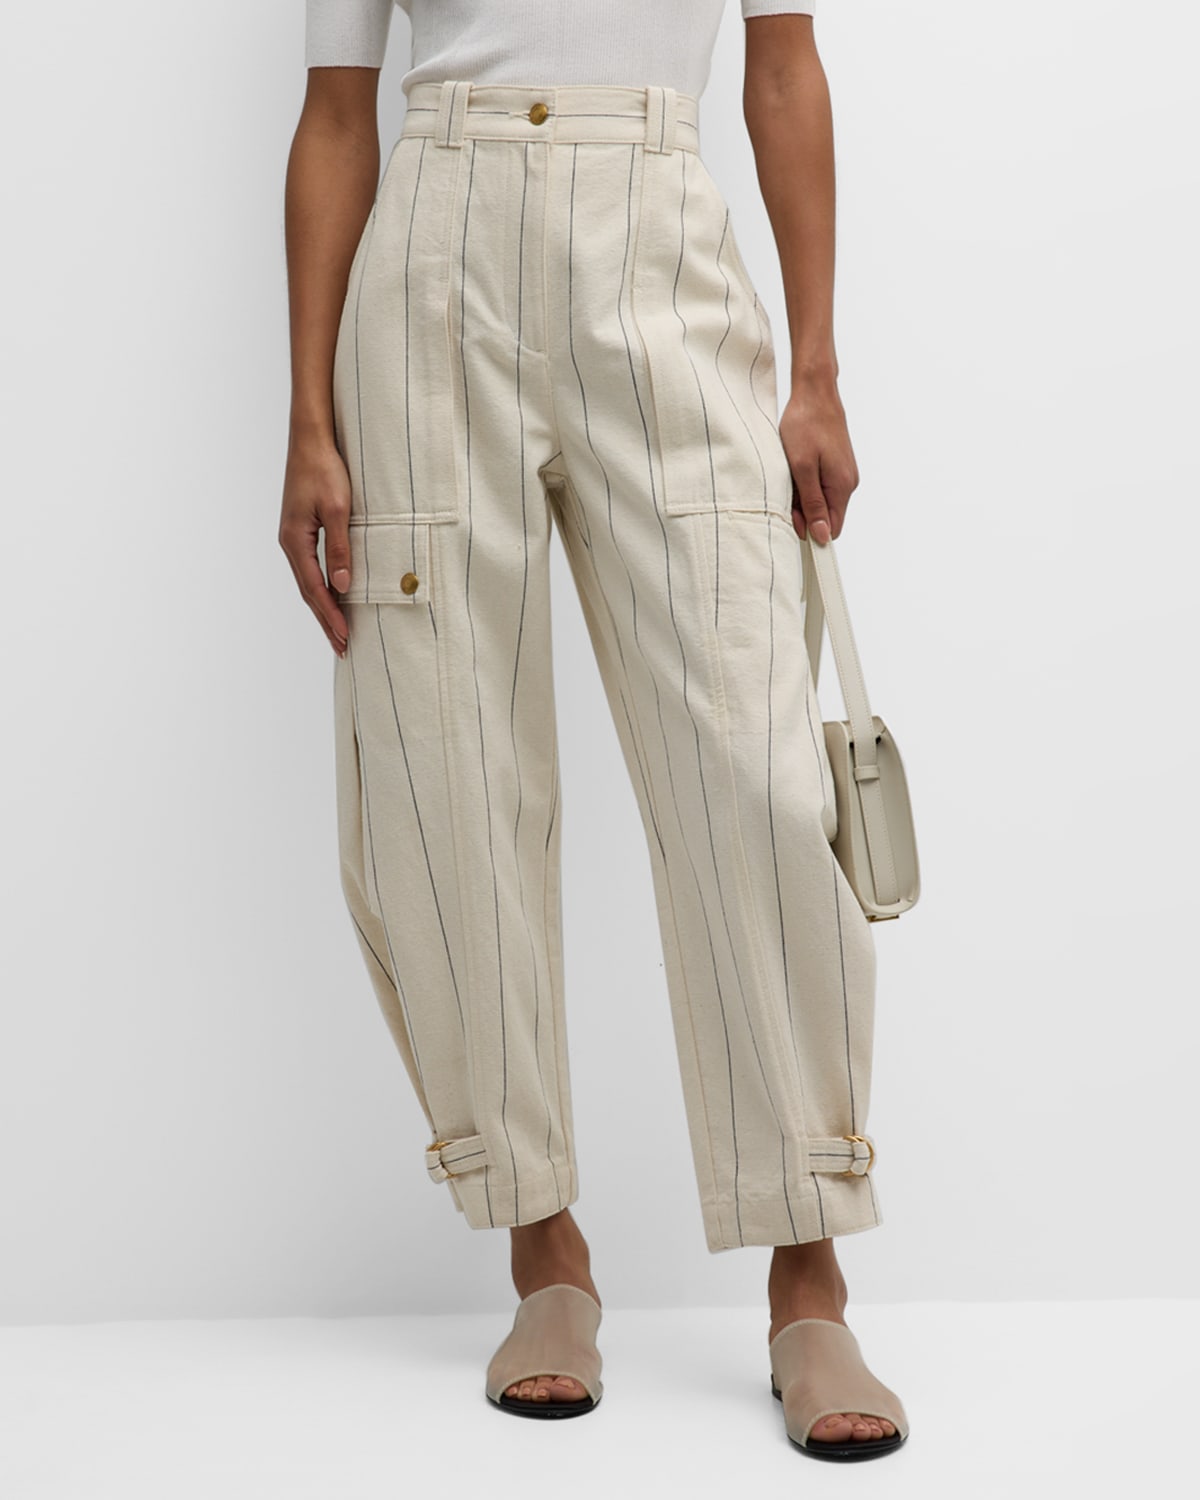 TORY BURCH STRIPED COTTON CANVAS trousers